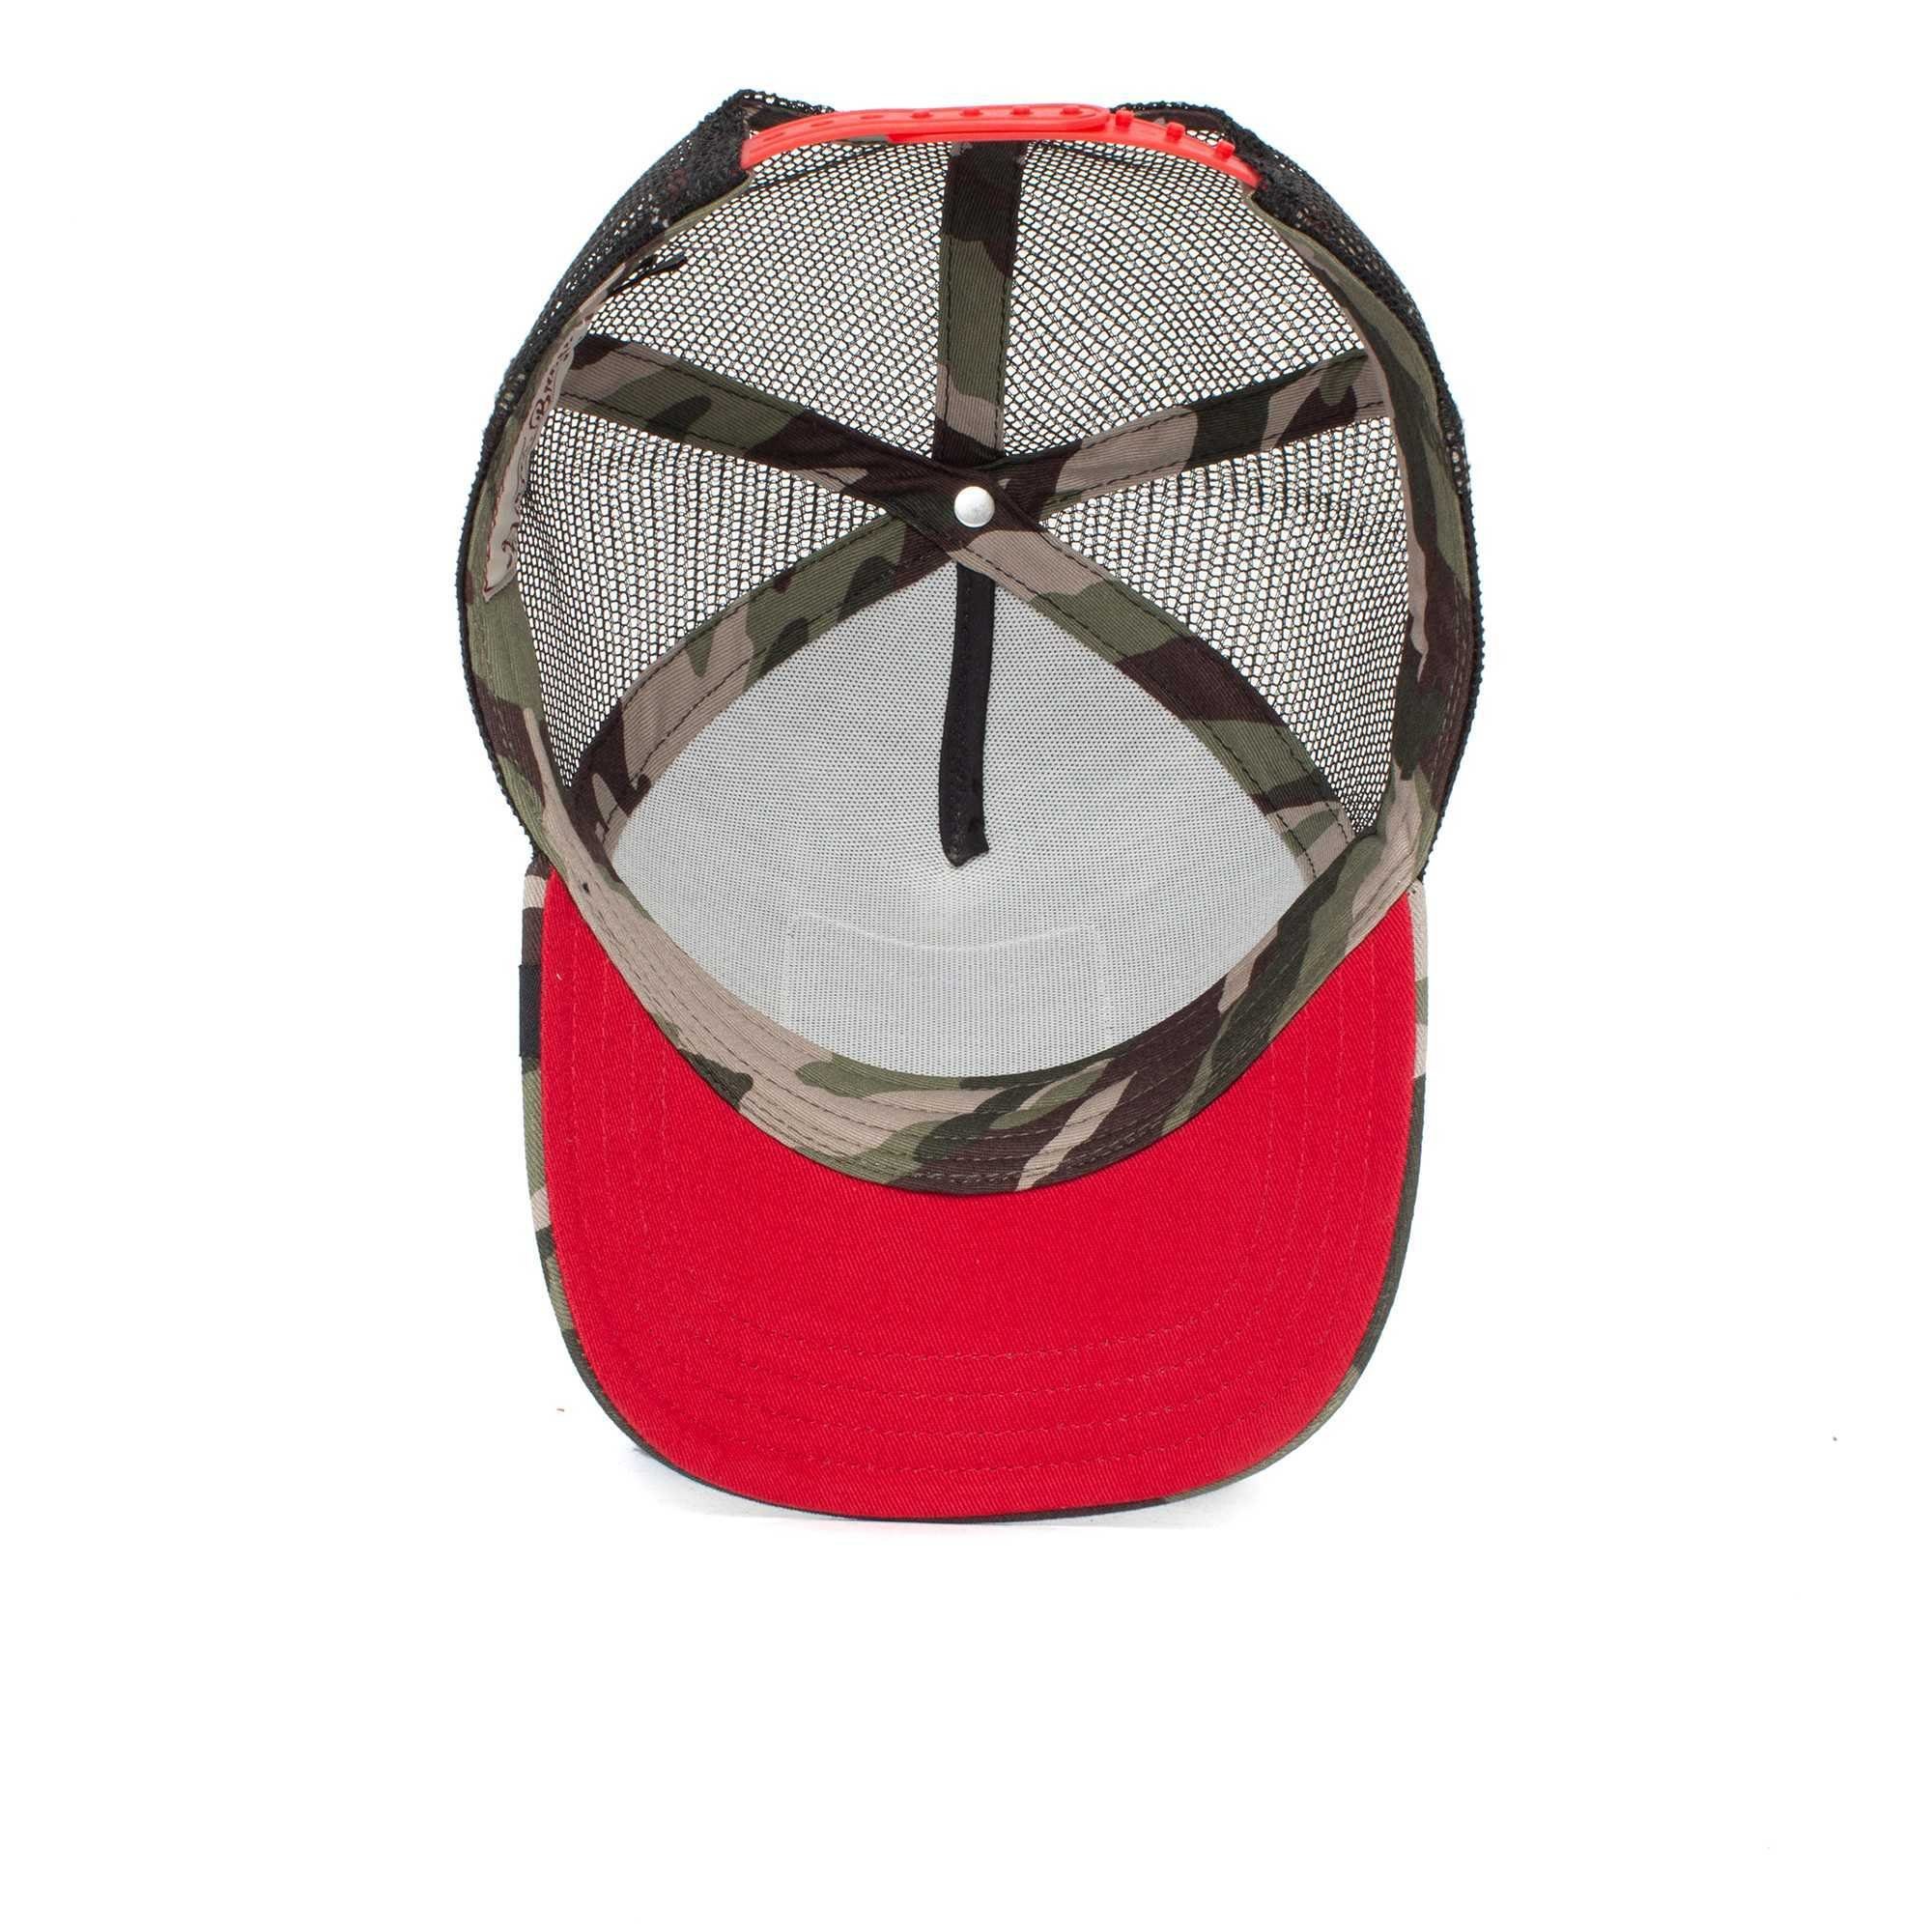 - Cap One Cap Trucker The Unisex GOORIN Size Baseball Bros. Rooster Kappe, Frontpatch,